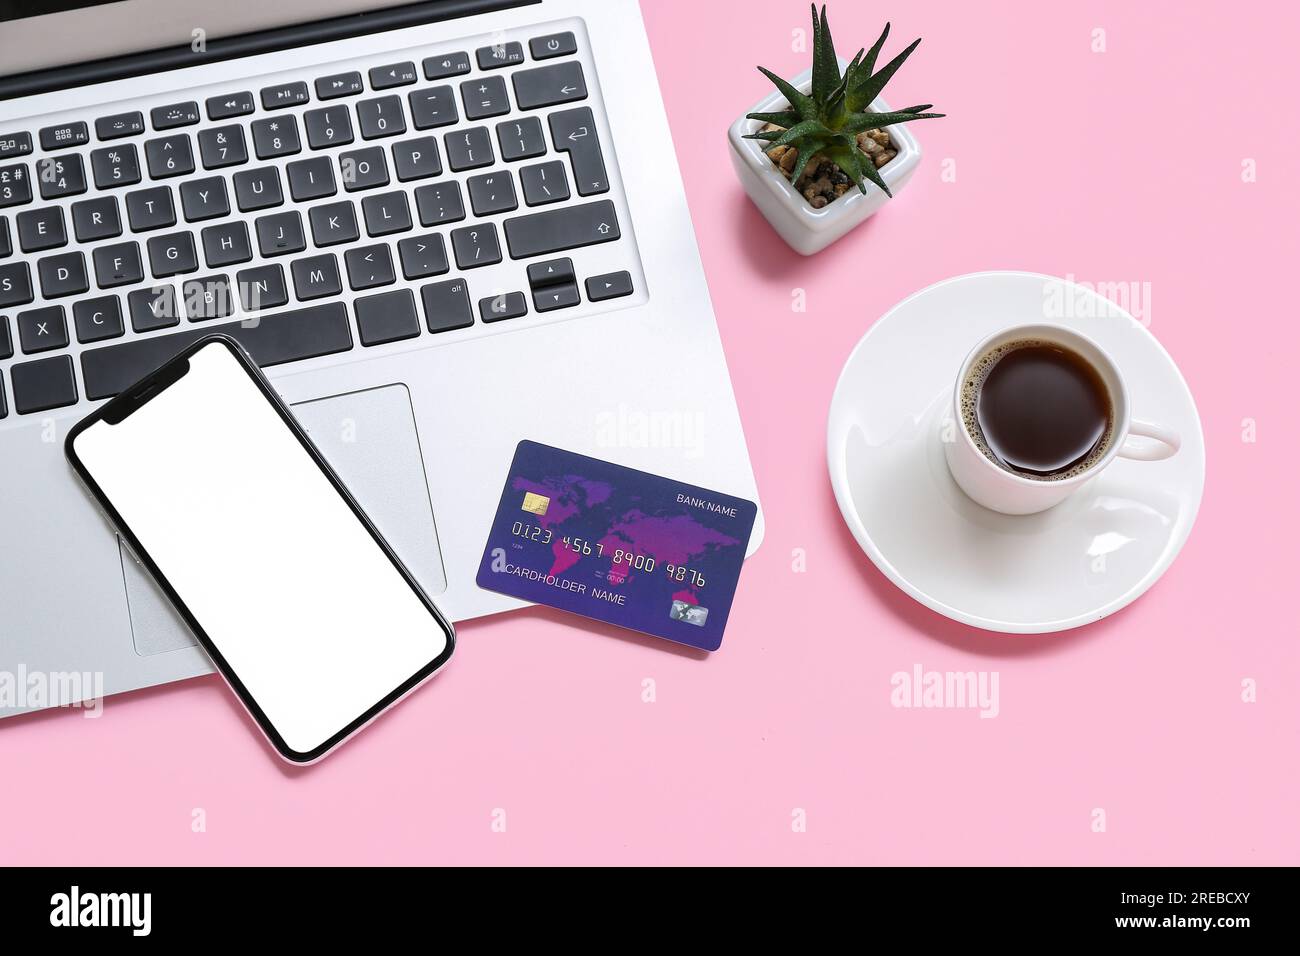 Laptop with credit card, cup of coffee and mobile phone on pink background Stock Photo